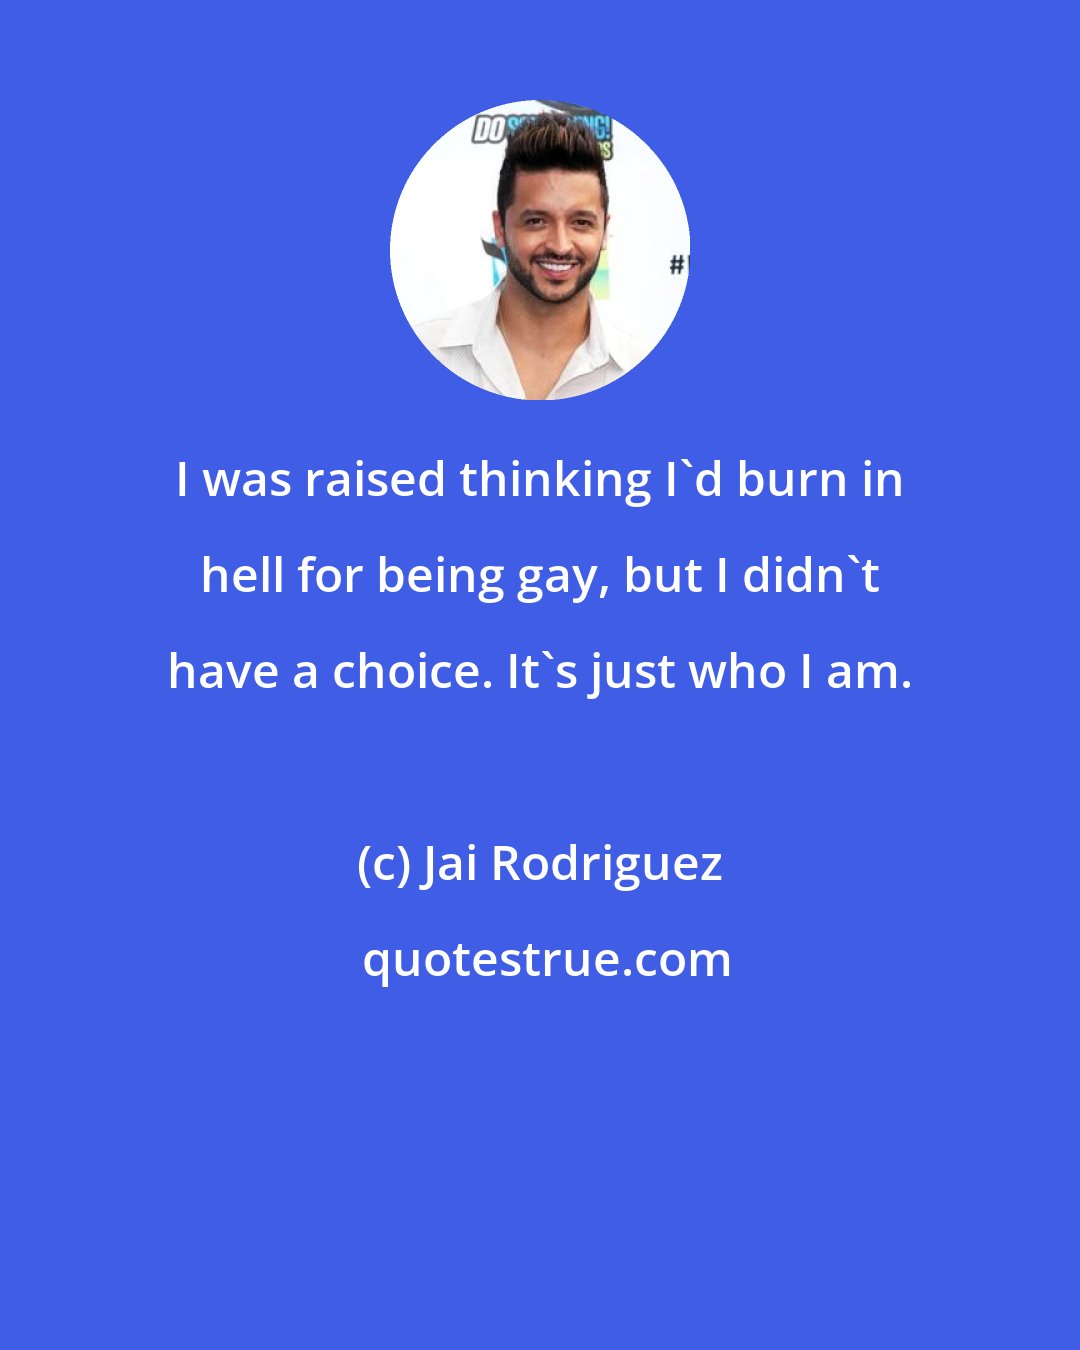 Jai Rodriguez: I was raised thinking I'd burn in hell for being gay, but I didn't have a choice. It's just who I am.